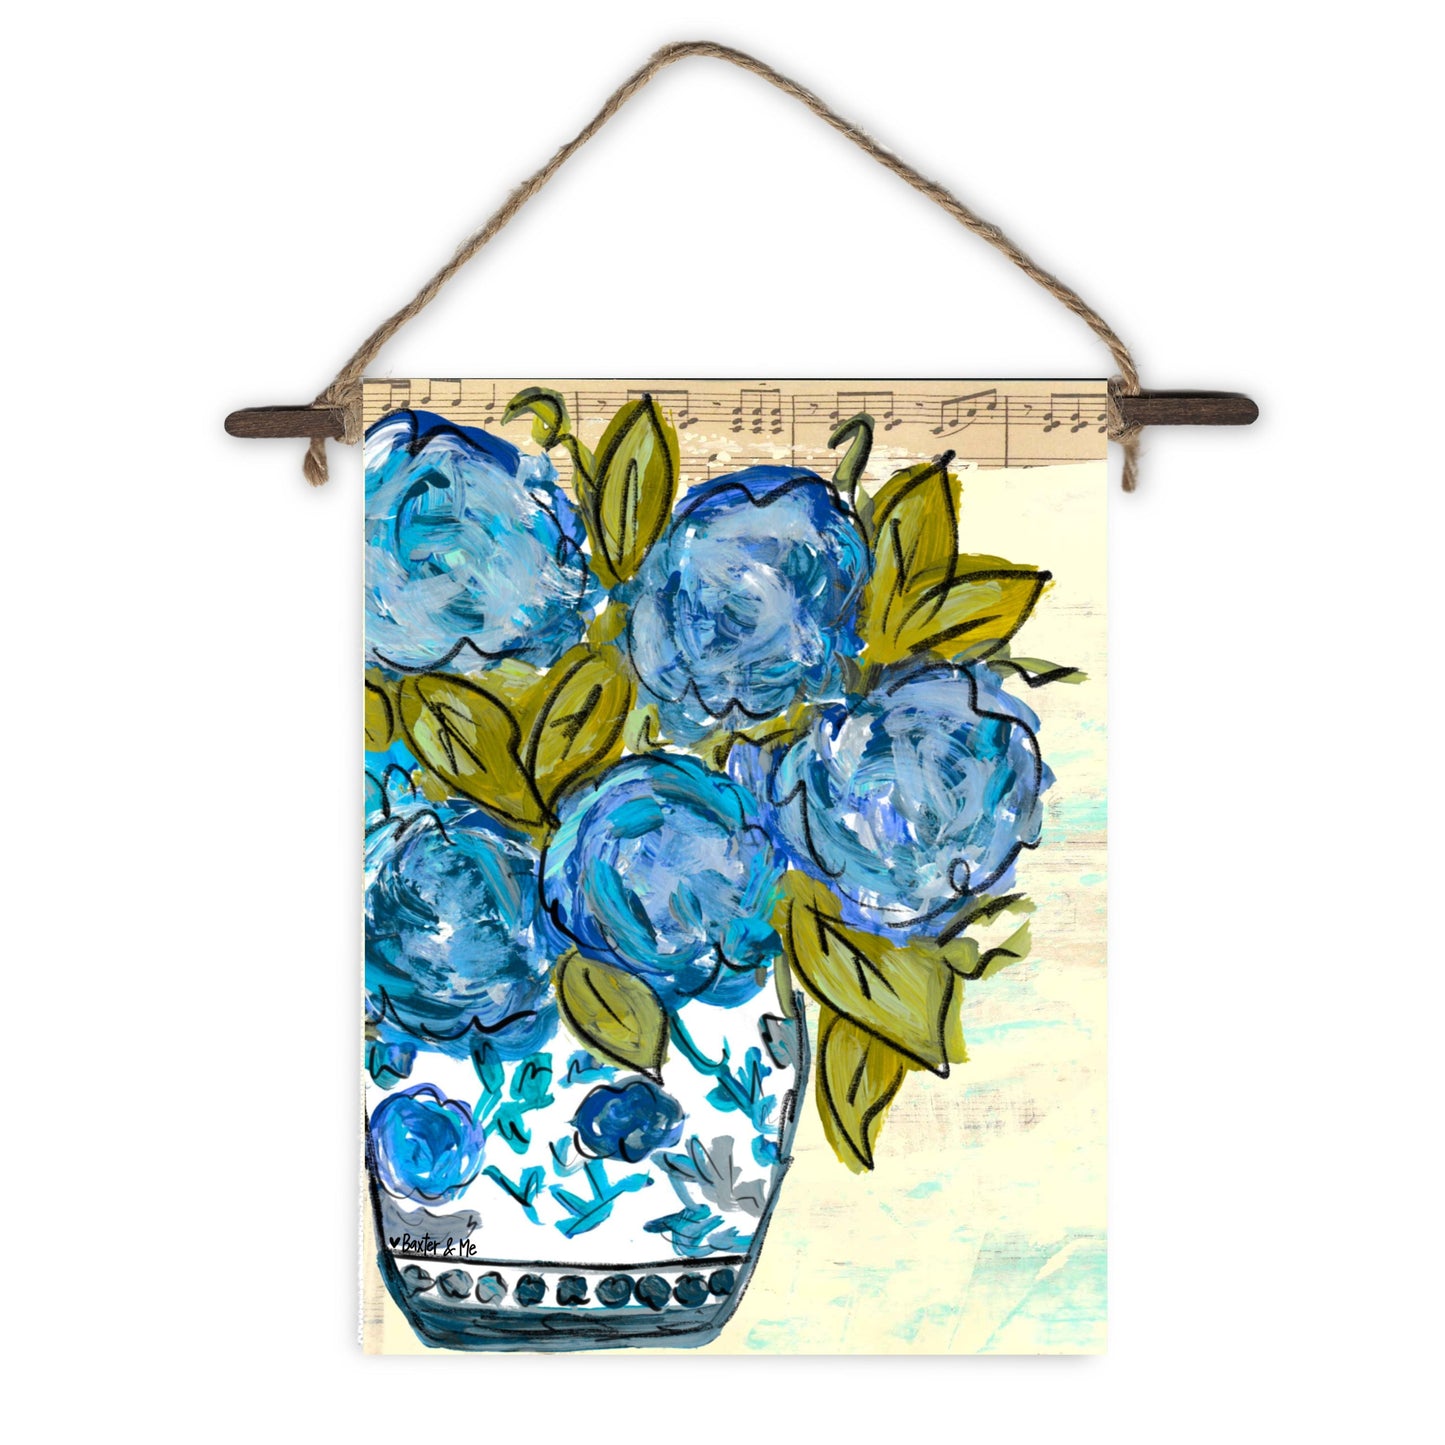 Chinoiserie Vase with Blue Hydrangeas Mini Wall Hanging